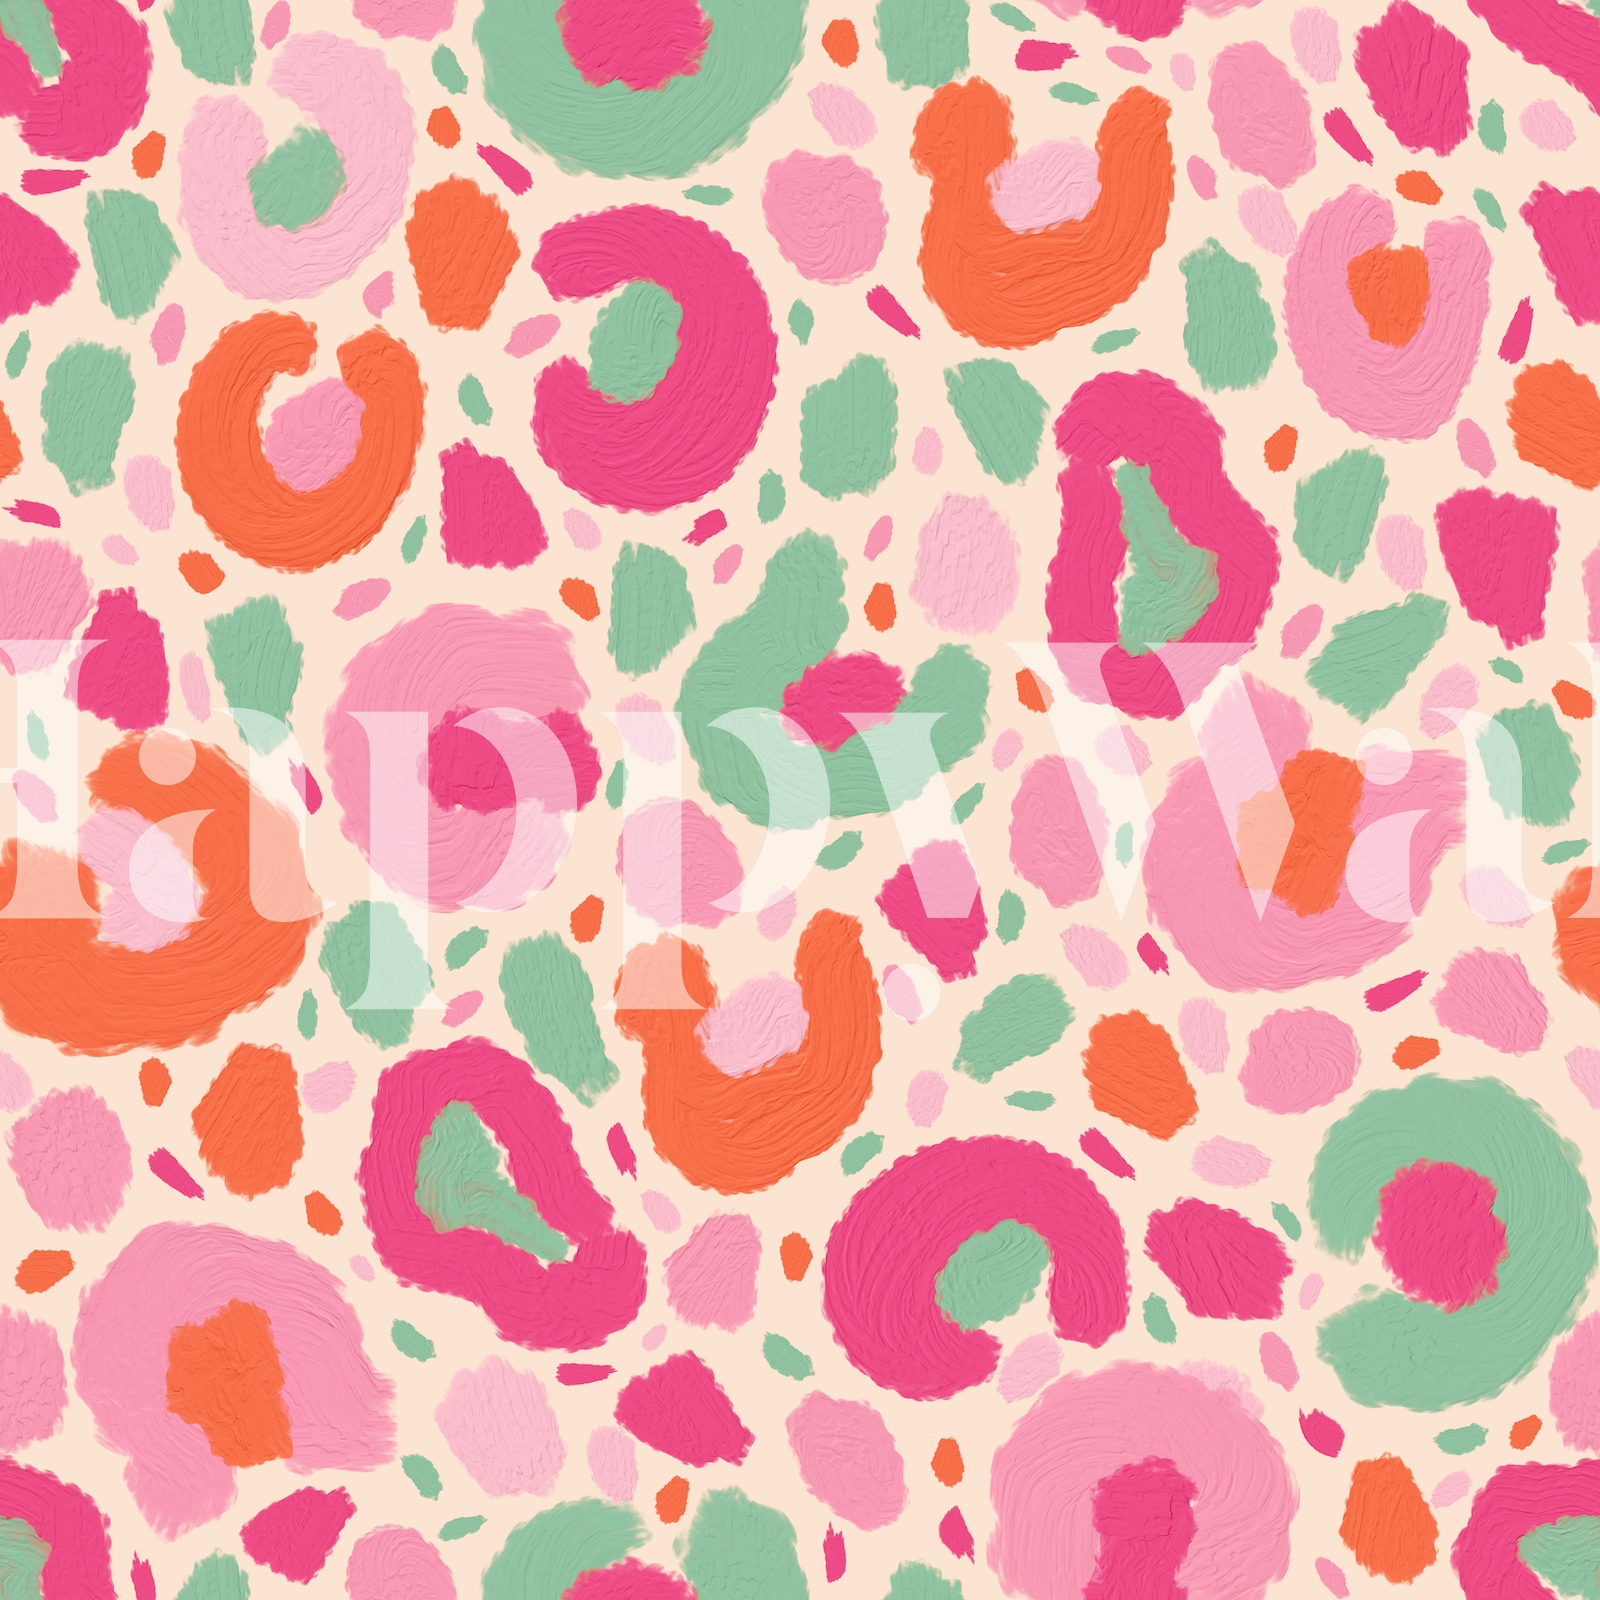 The Leopard wallpaper - Happywall